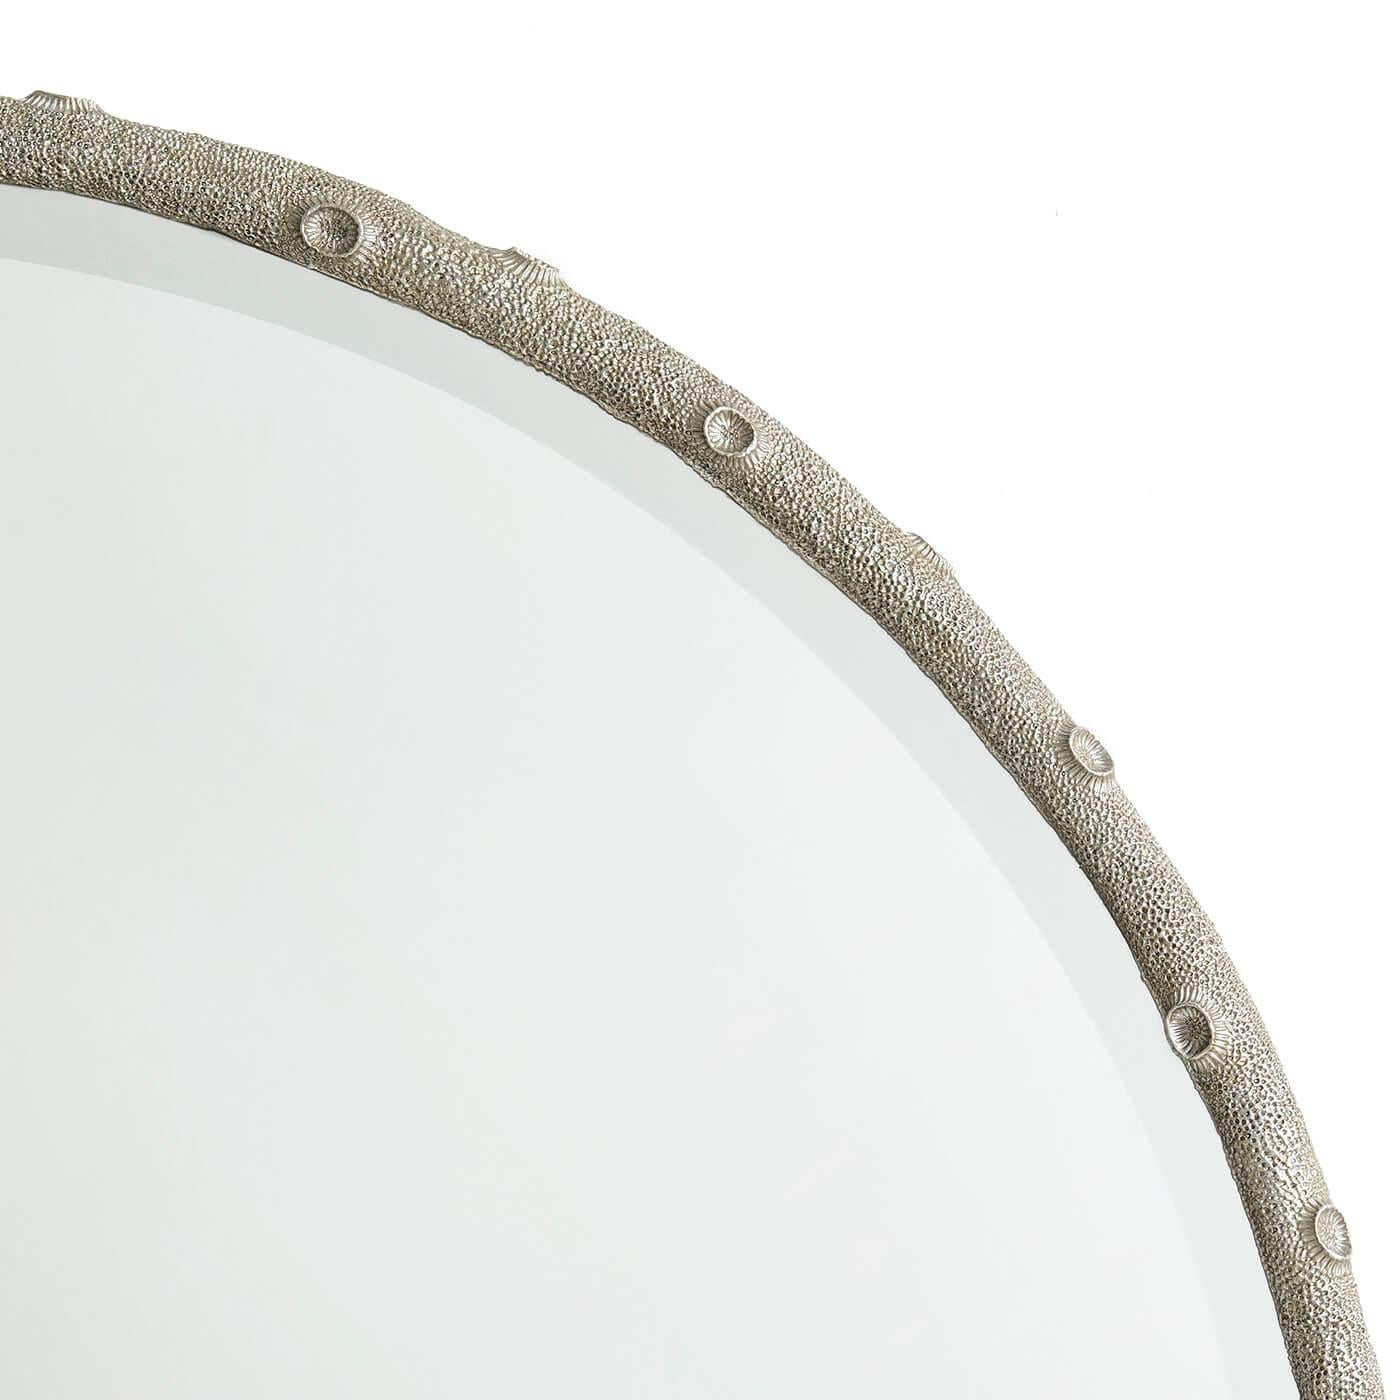 Round pearl finish coral cast aluminum frame wall mirror with a circular beveled glass plate.

Dimensions: 42